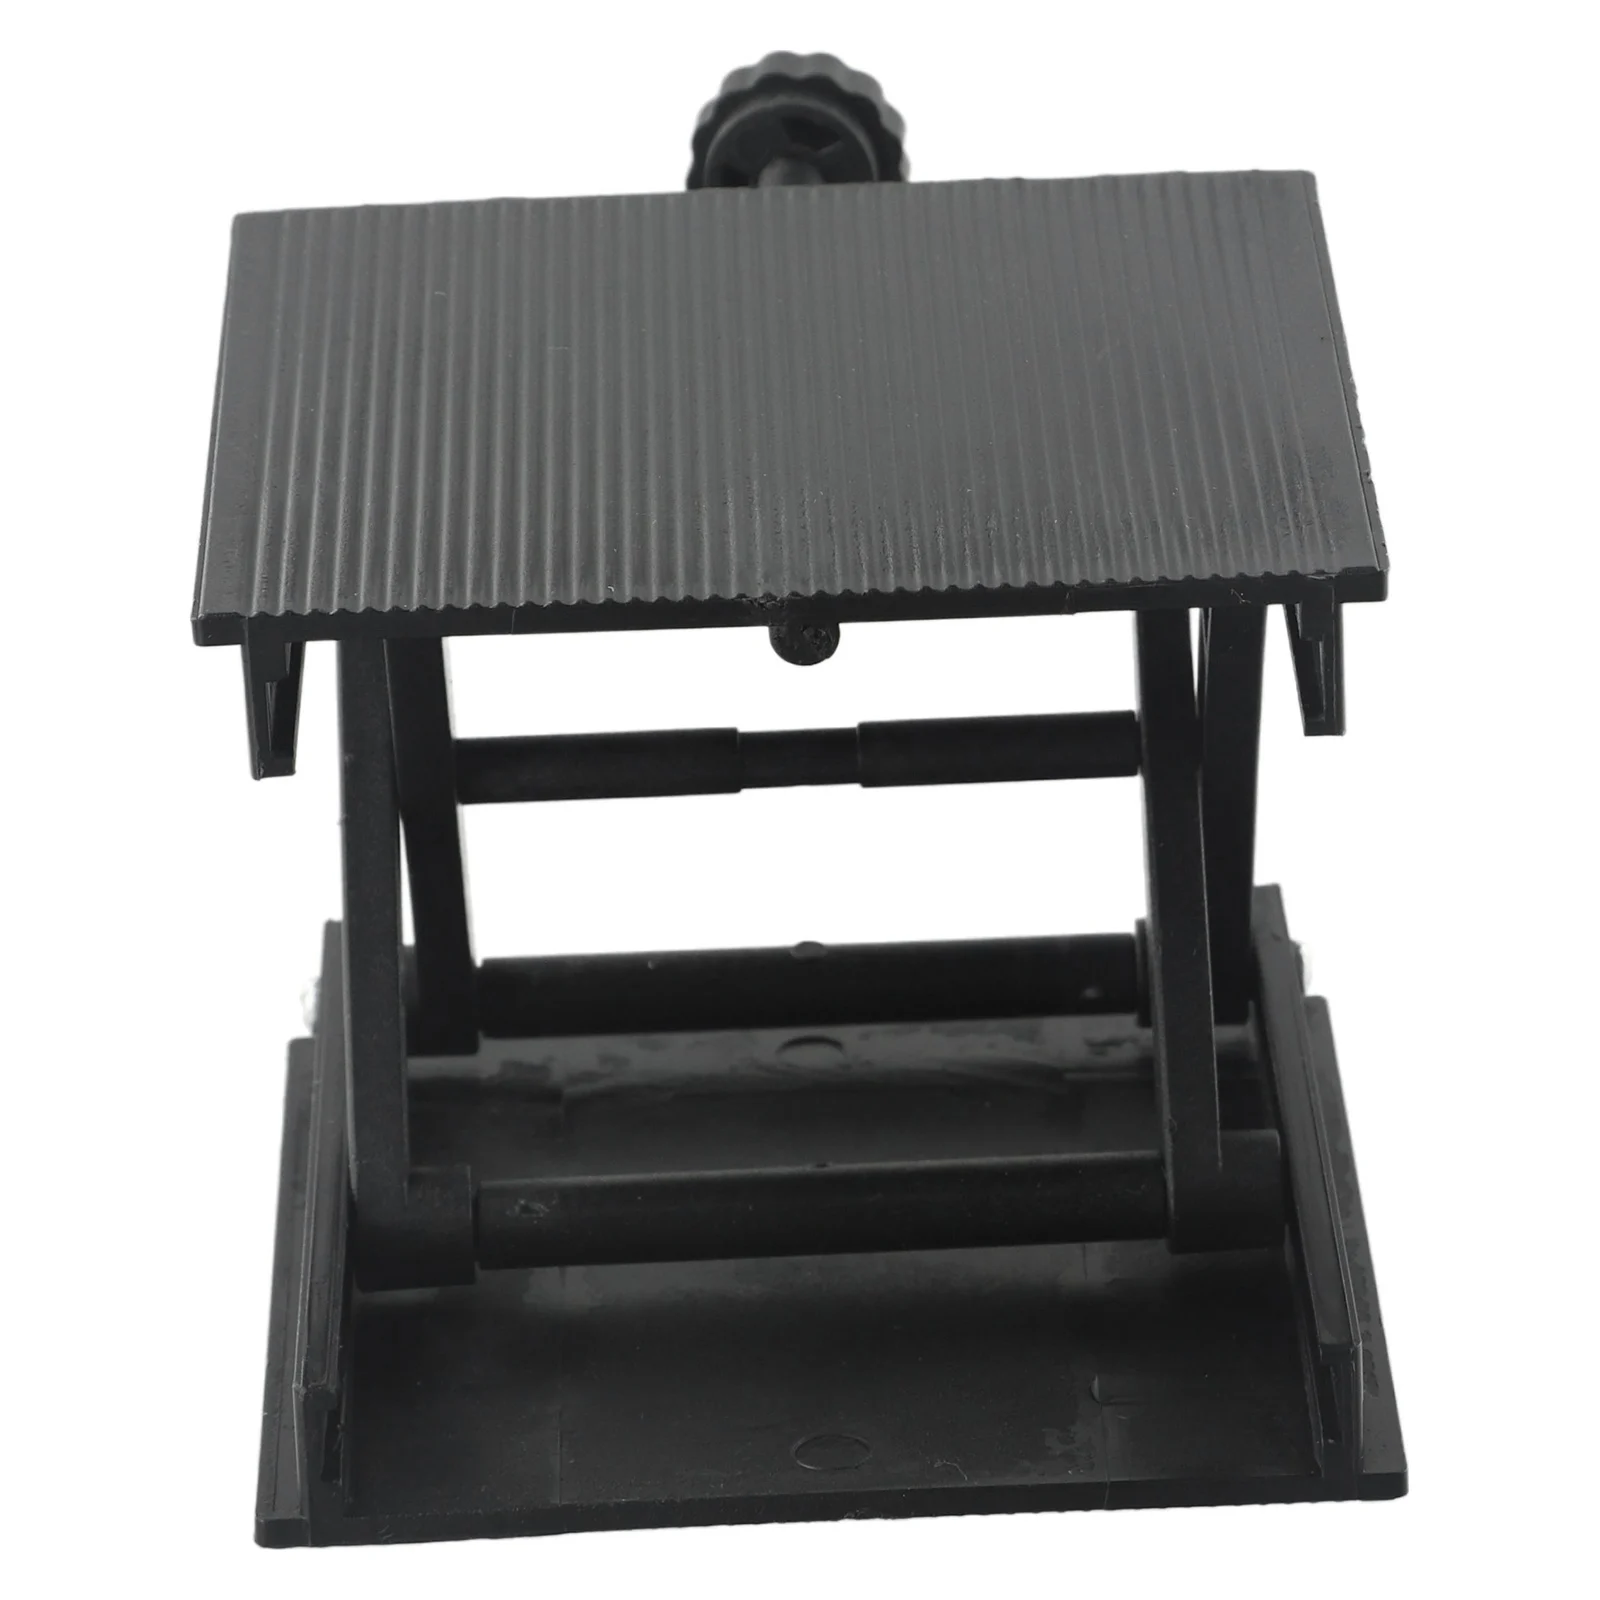 

Construction Tools Lifting Platform Corrosion Resistant Hardness Hot Sale Reliable Rust High Quality Materials